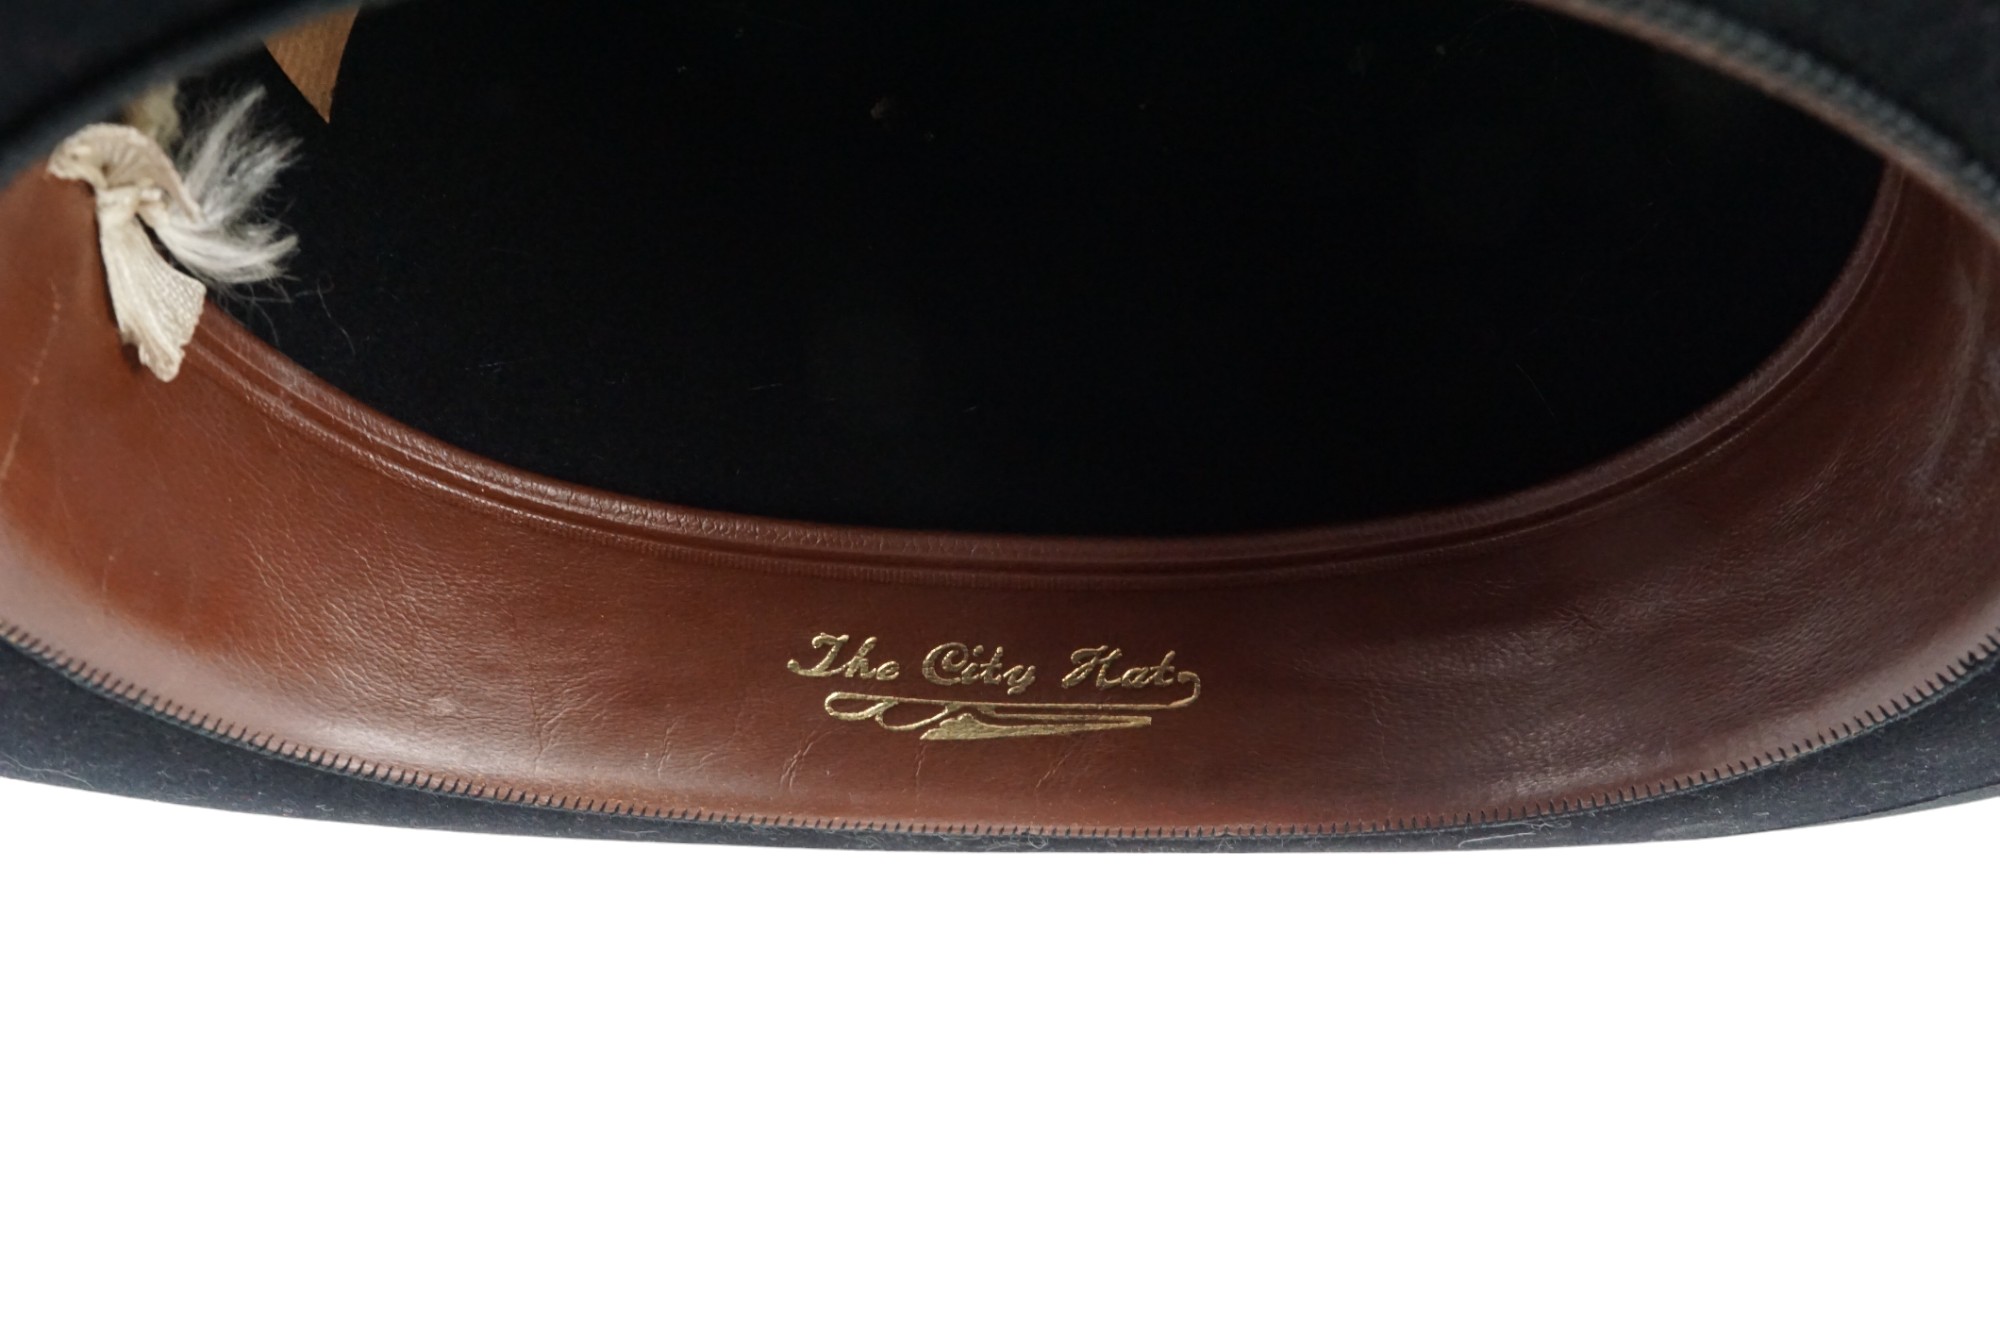 A vintage "The City Hat" bowler hat, size 7 1/4 - Image 3 of 4